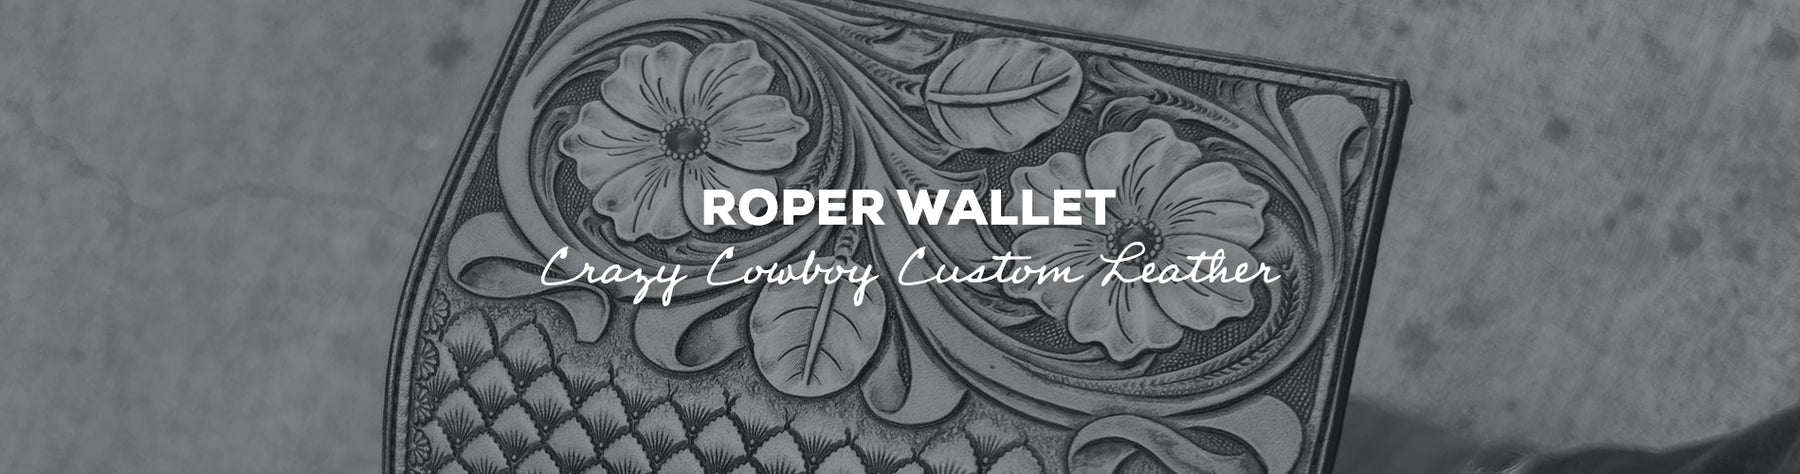 Gift Idea: Roper Wallet with Crazy Cowboy Custom Leather